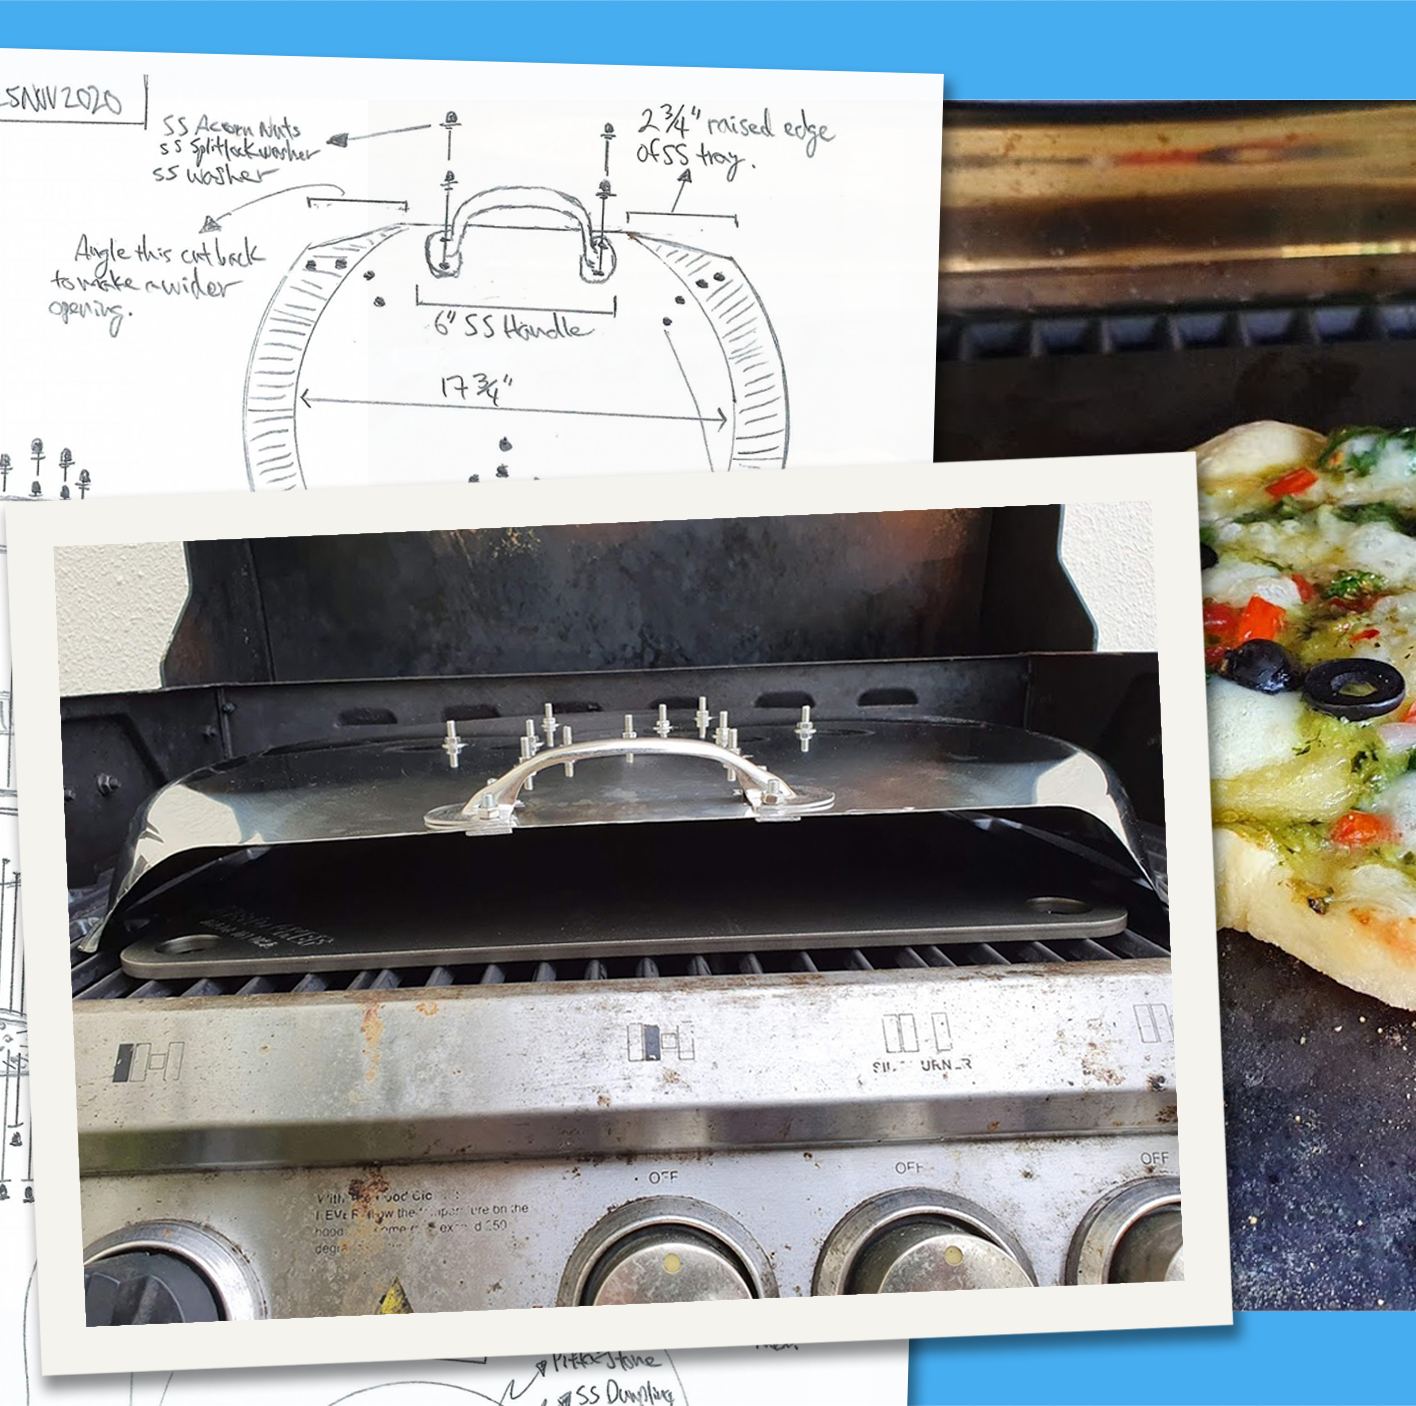 How to Make a Pizza Oven for Your Grill